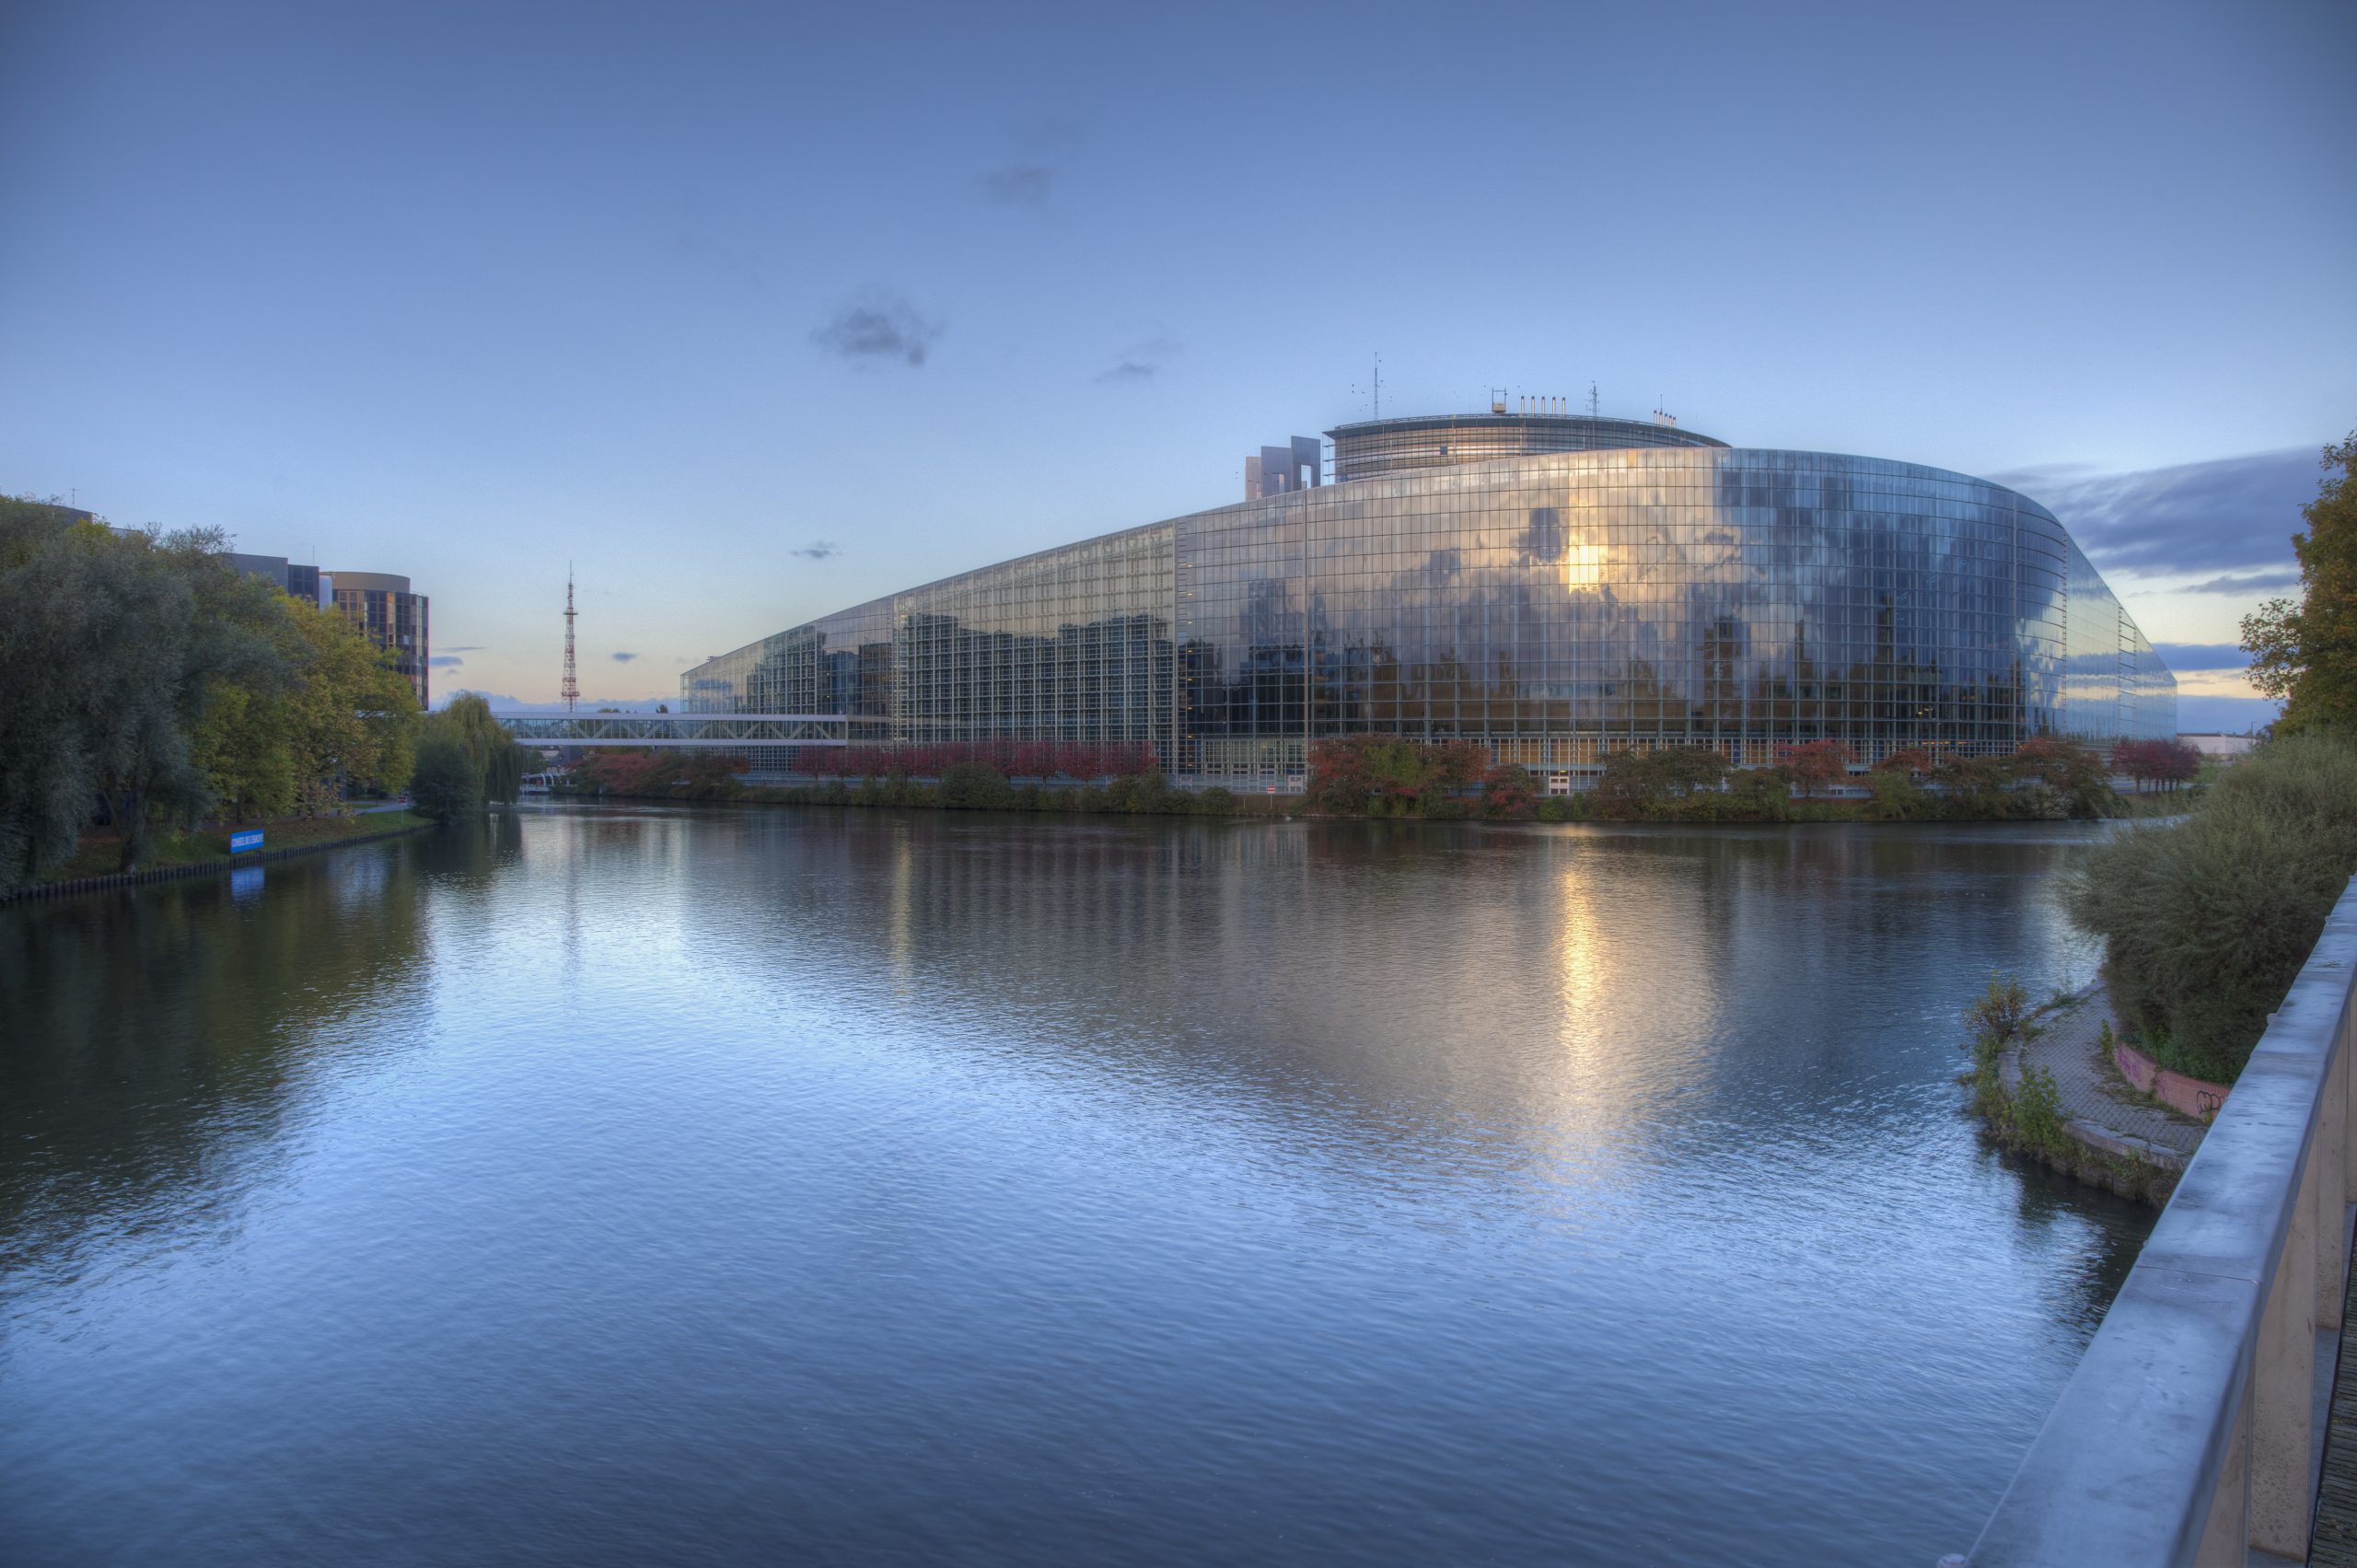 A year of change: the European Parliament in 2014